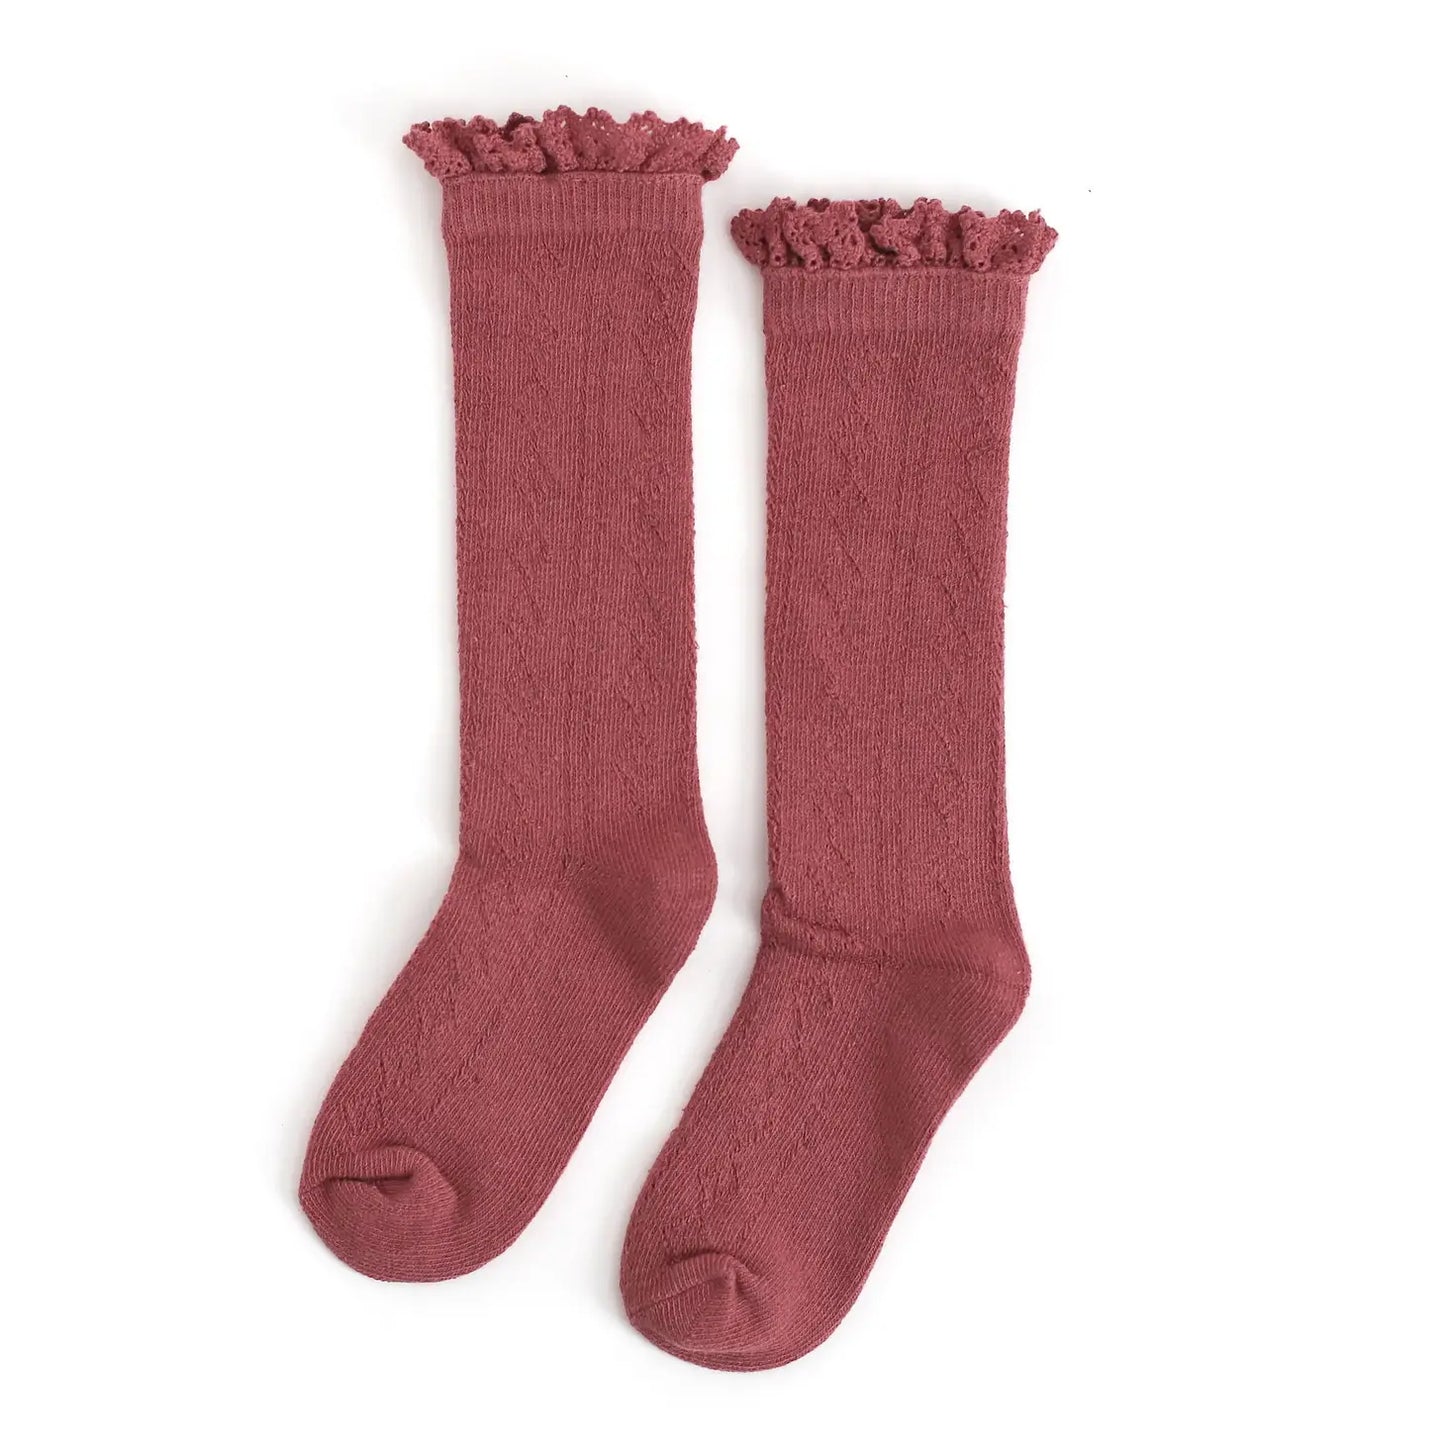 Fancy Lace Knee Highs-Mauve Rose - Little Stocking Company